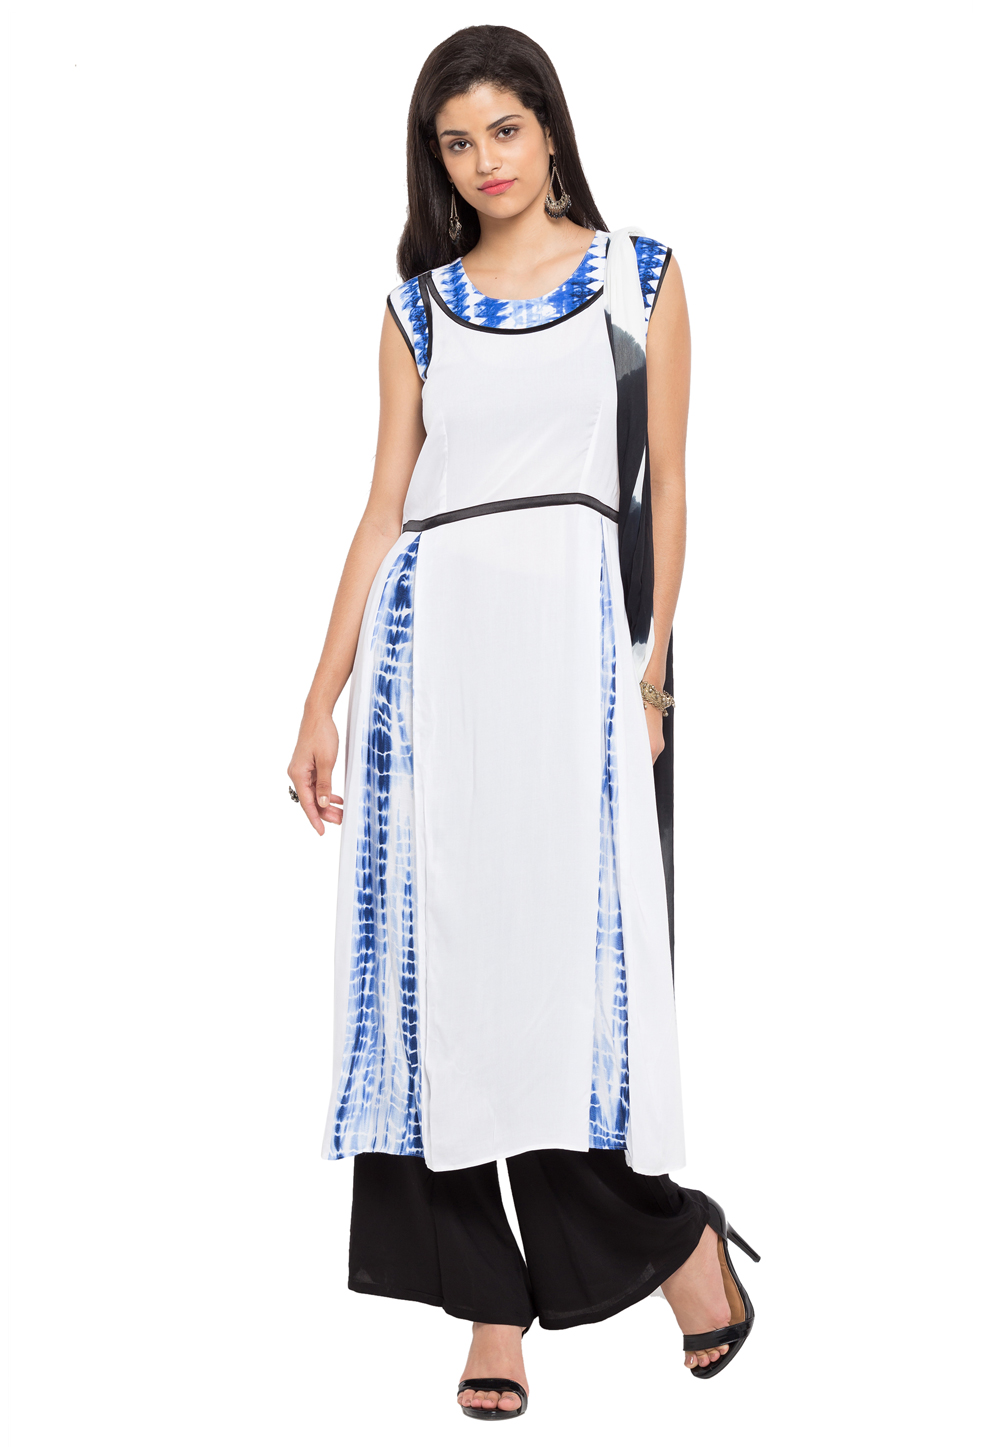 Off White Cotton Readymade Palazzo Suit 230440